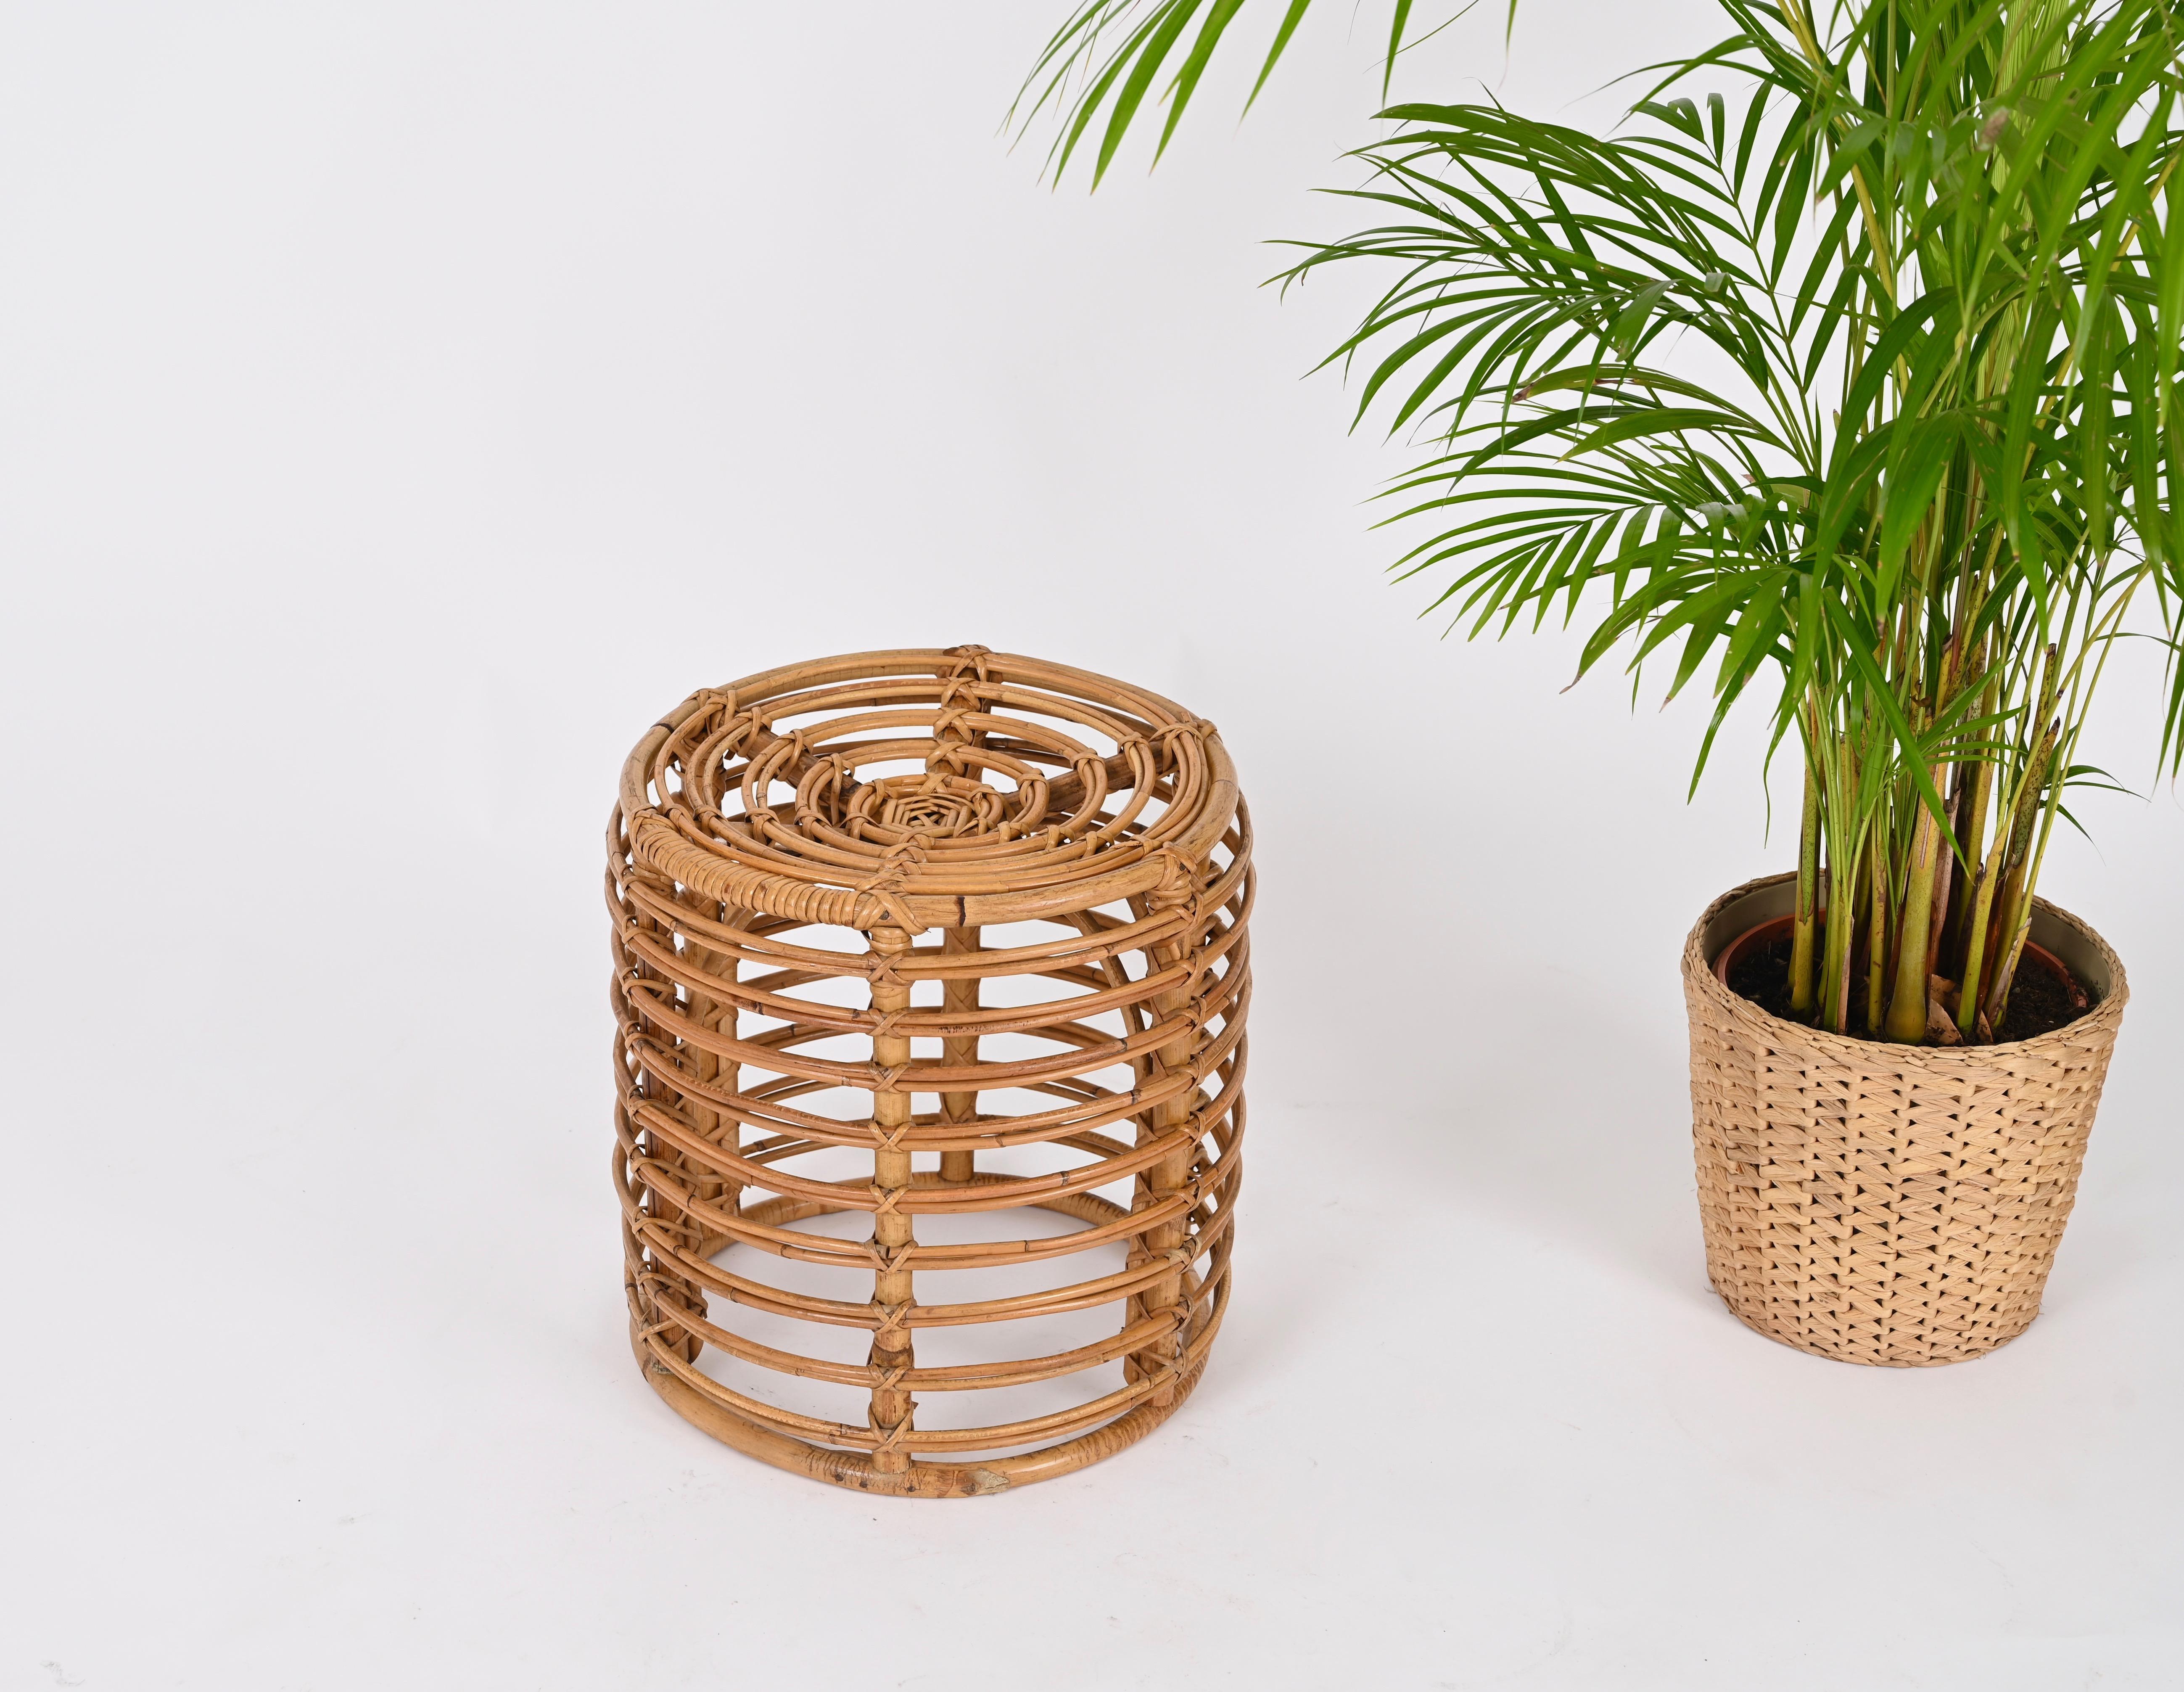 Gorgeous Tito Agnoli round pouf fully made in curved rattan and wicker. This gorgeous French Riviera style pouf was hand-made in Italy during the 1970s.

The craftsmanship of this stool is exceptional and the rattan structure allows it to be light